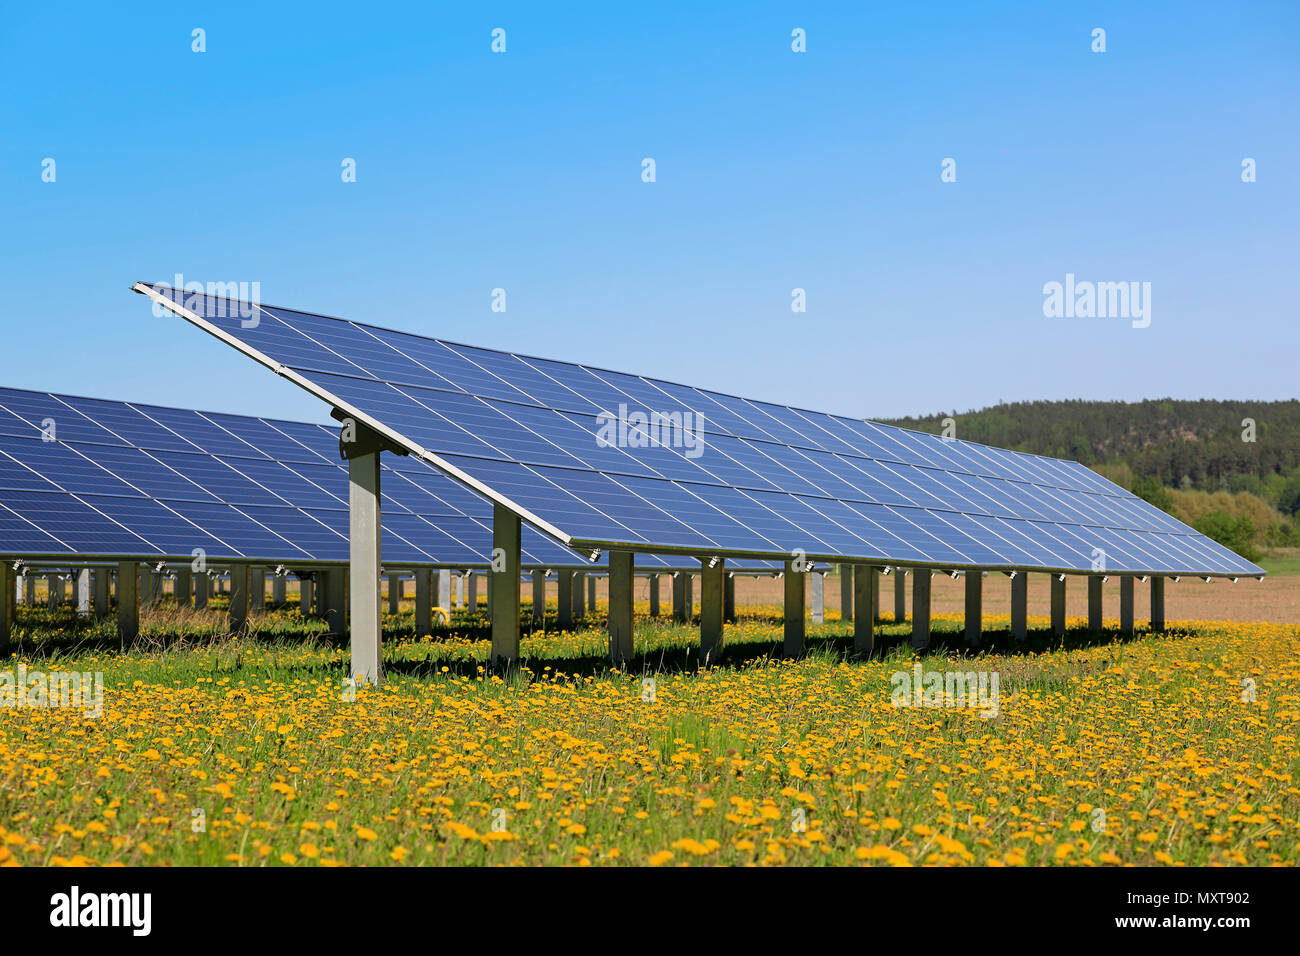 Solar panels on an open green field with yellow flowers and blue sky in the spring. Stock Photo